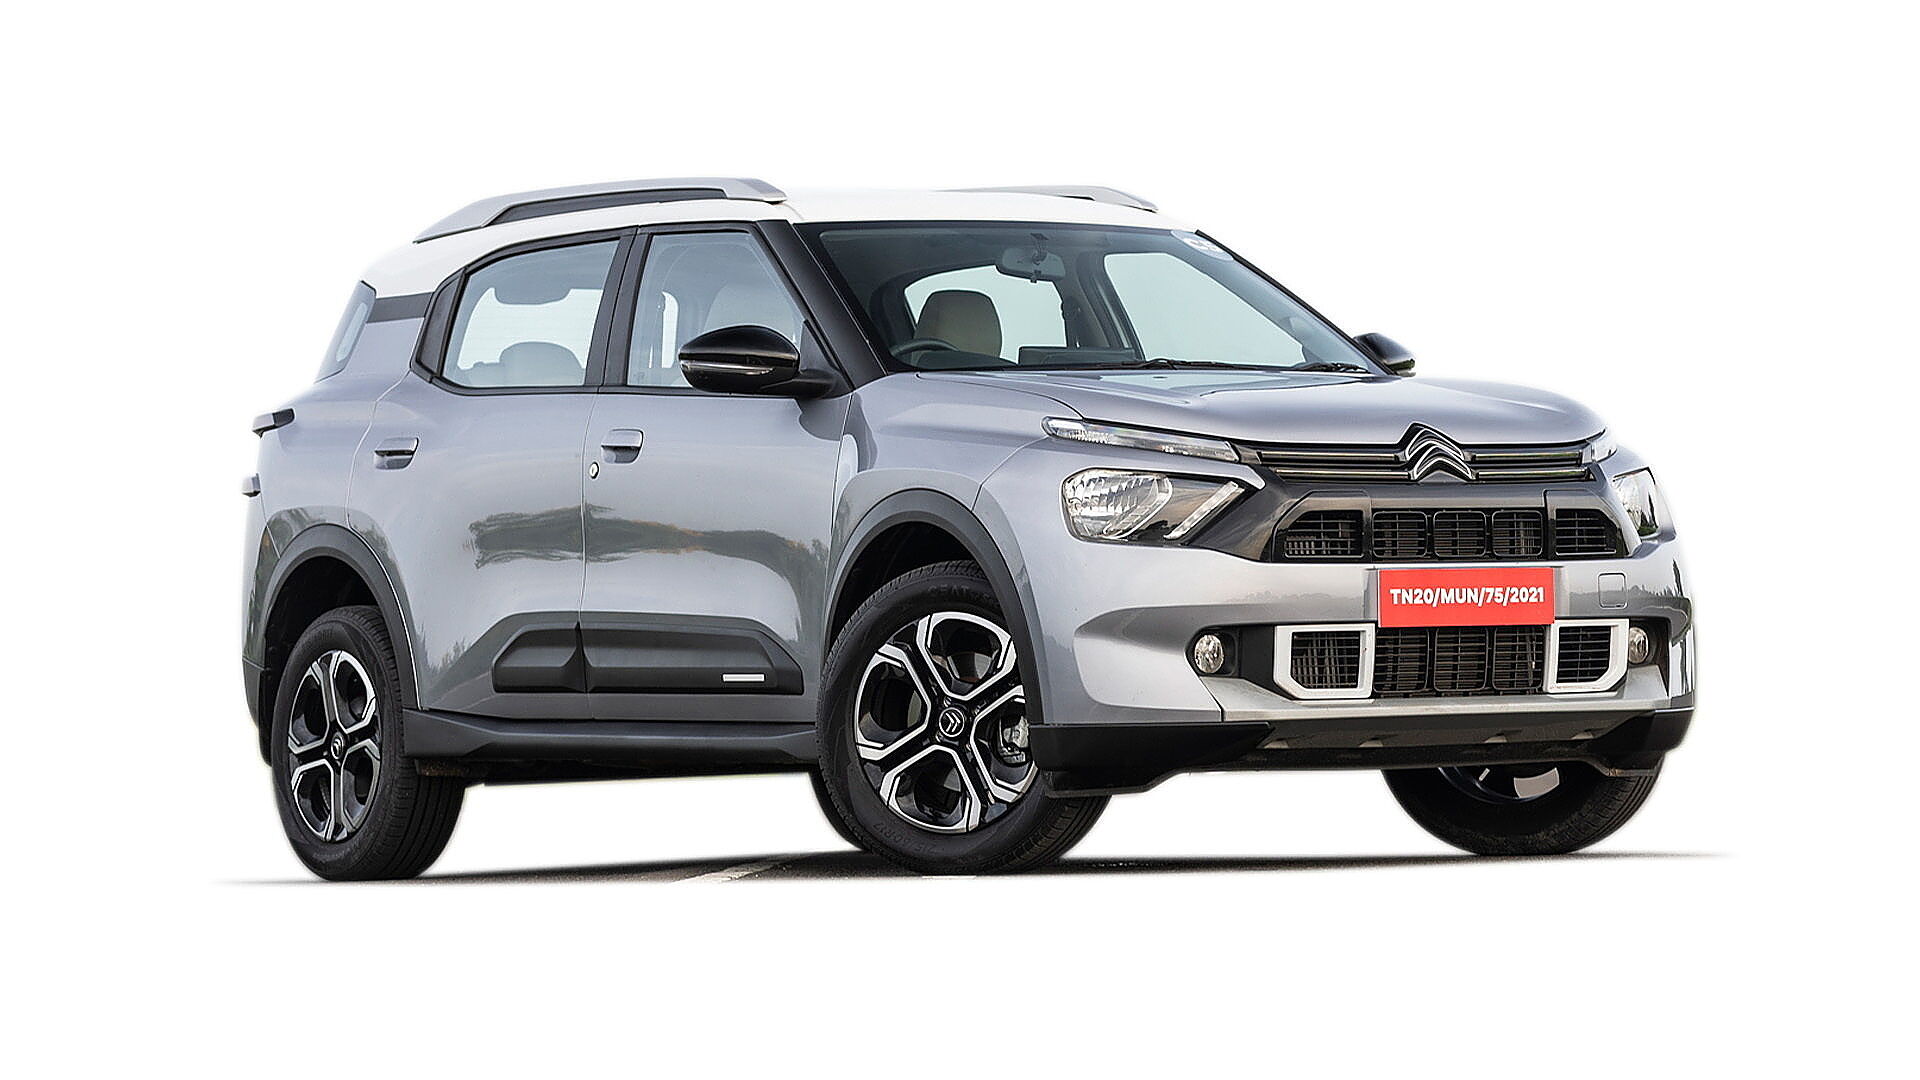 BS6 2 Citroen C3 Turbo variants launched; prices start at Rs 8.28 lakh -  CarWale